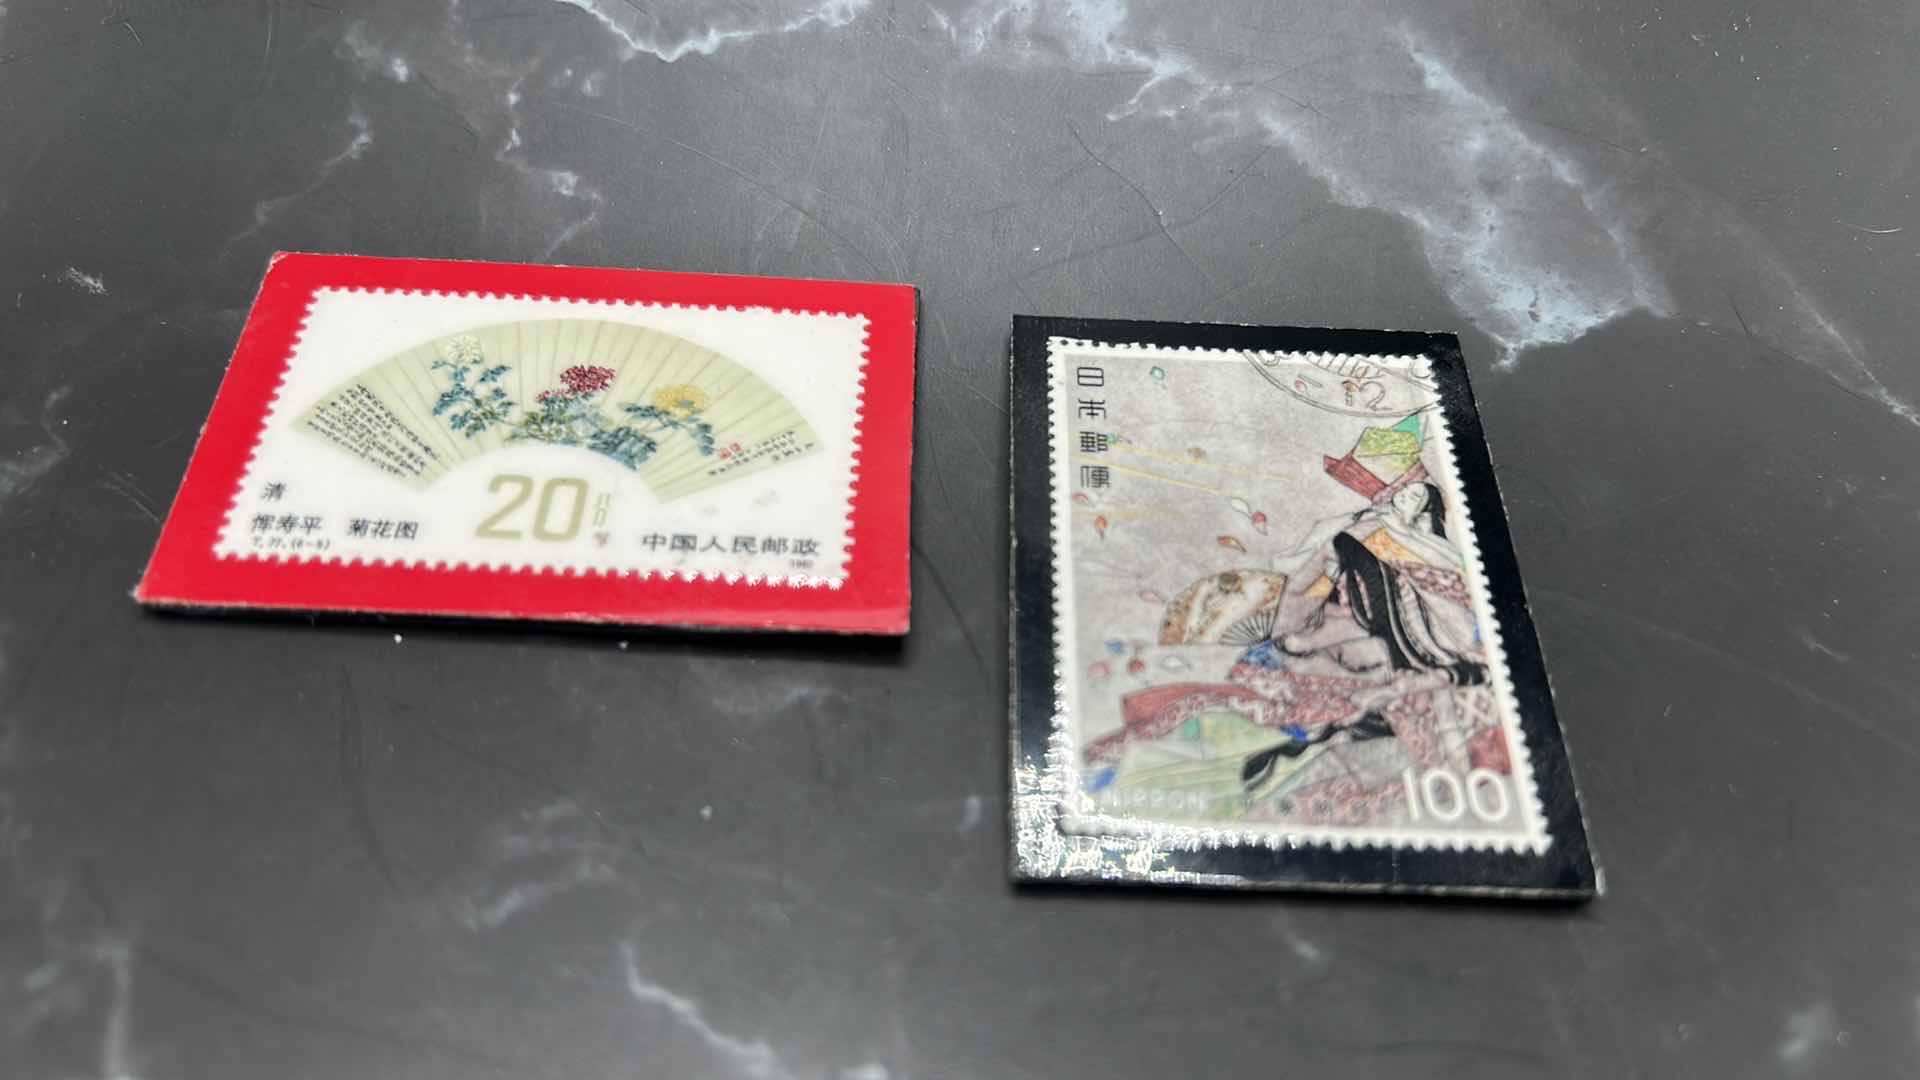 Photo 5 of 5 - CHINESE COLLECTIBLES  (BEAR MEASURES 3 1/2” x 3 1/2”)